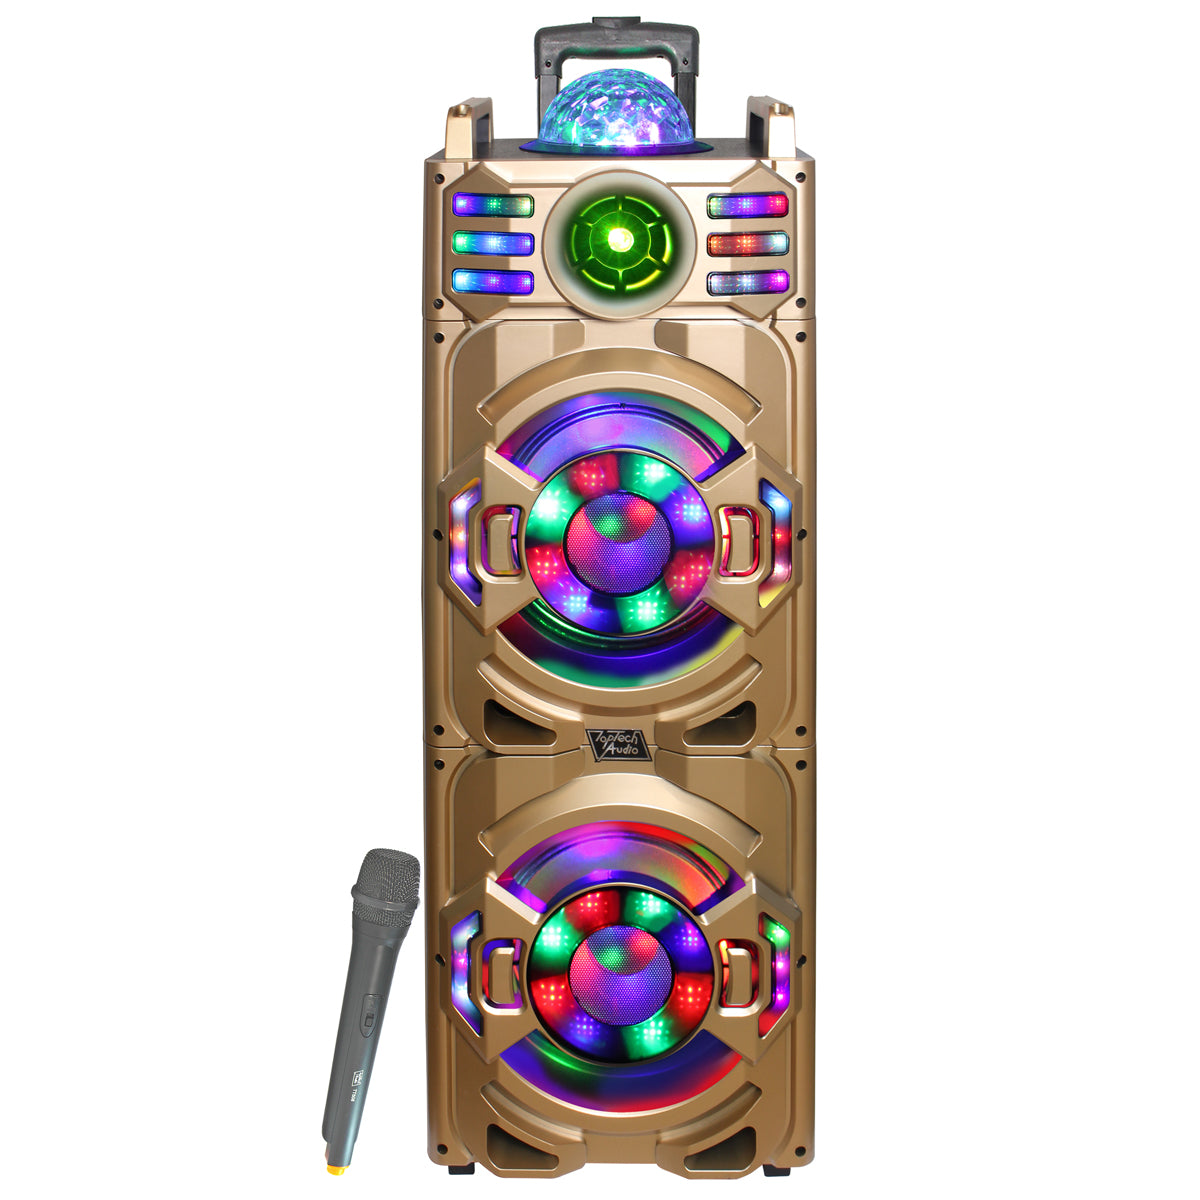 Top Tech Audio Fully Amplified Portable 4500 Watts Peak Power 2 x10” Speaker with DISCO BALL